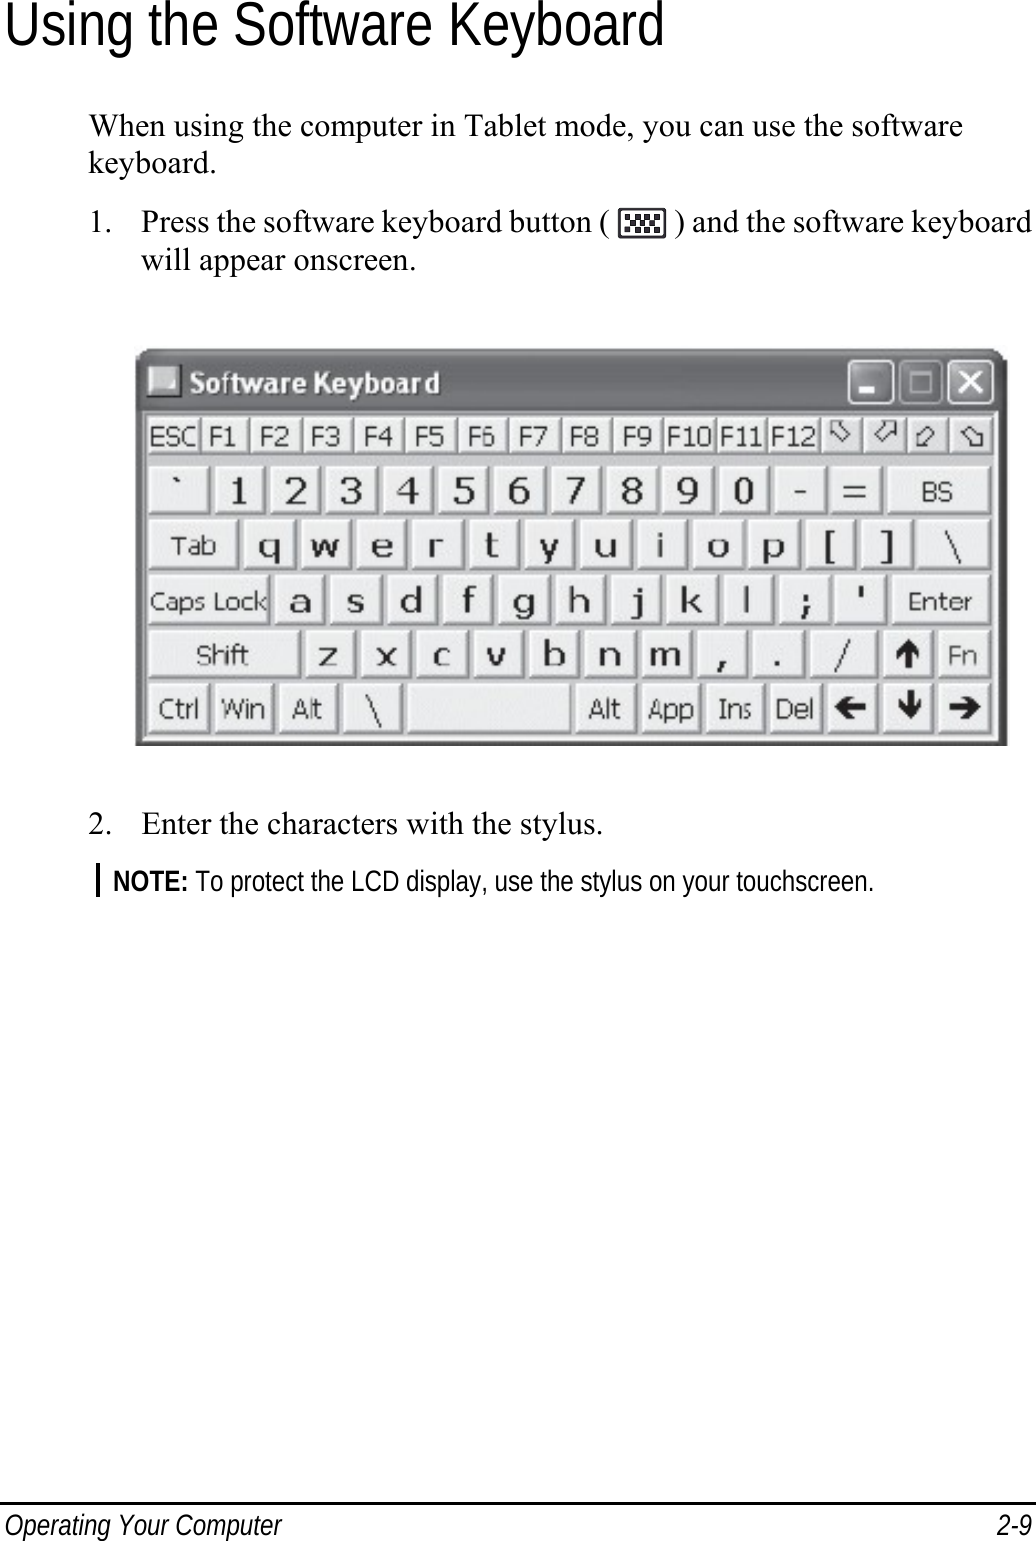  Operating Your Computer  2-9 Using the Software Keyboard When using the computer in Tablet mode, you can use the software keyboard. 1. Press the software keyboard button (   ) and the software keyboard will appear onscreen.  2. Enter the characters with the stylus. NOTE: To protect the LCD display, use the stylus on your touchscreen.  